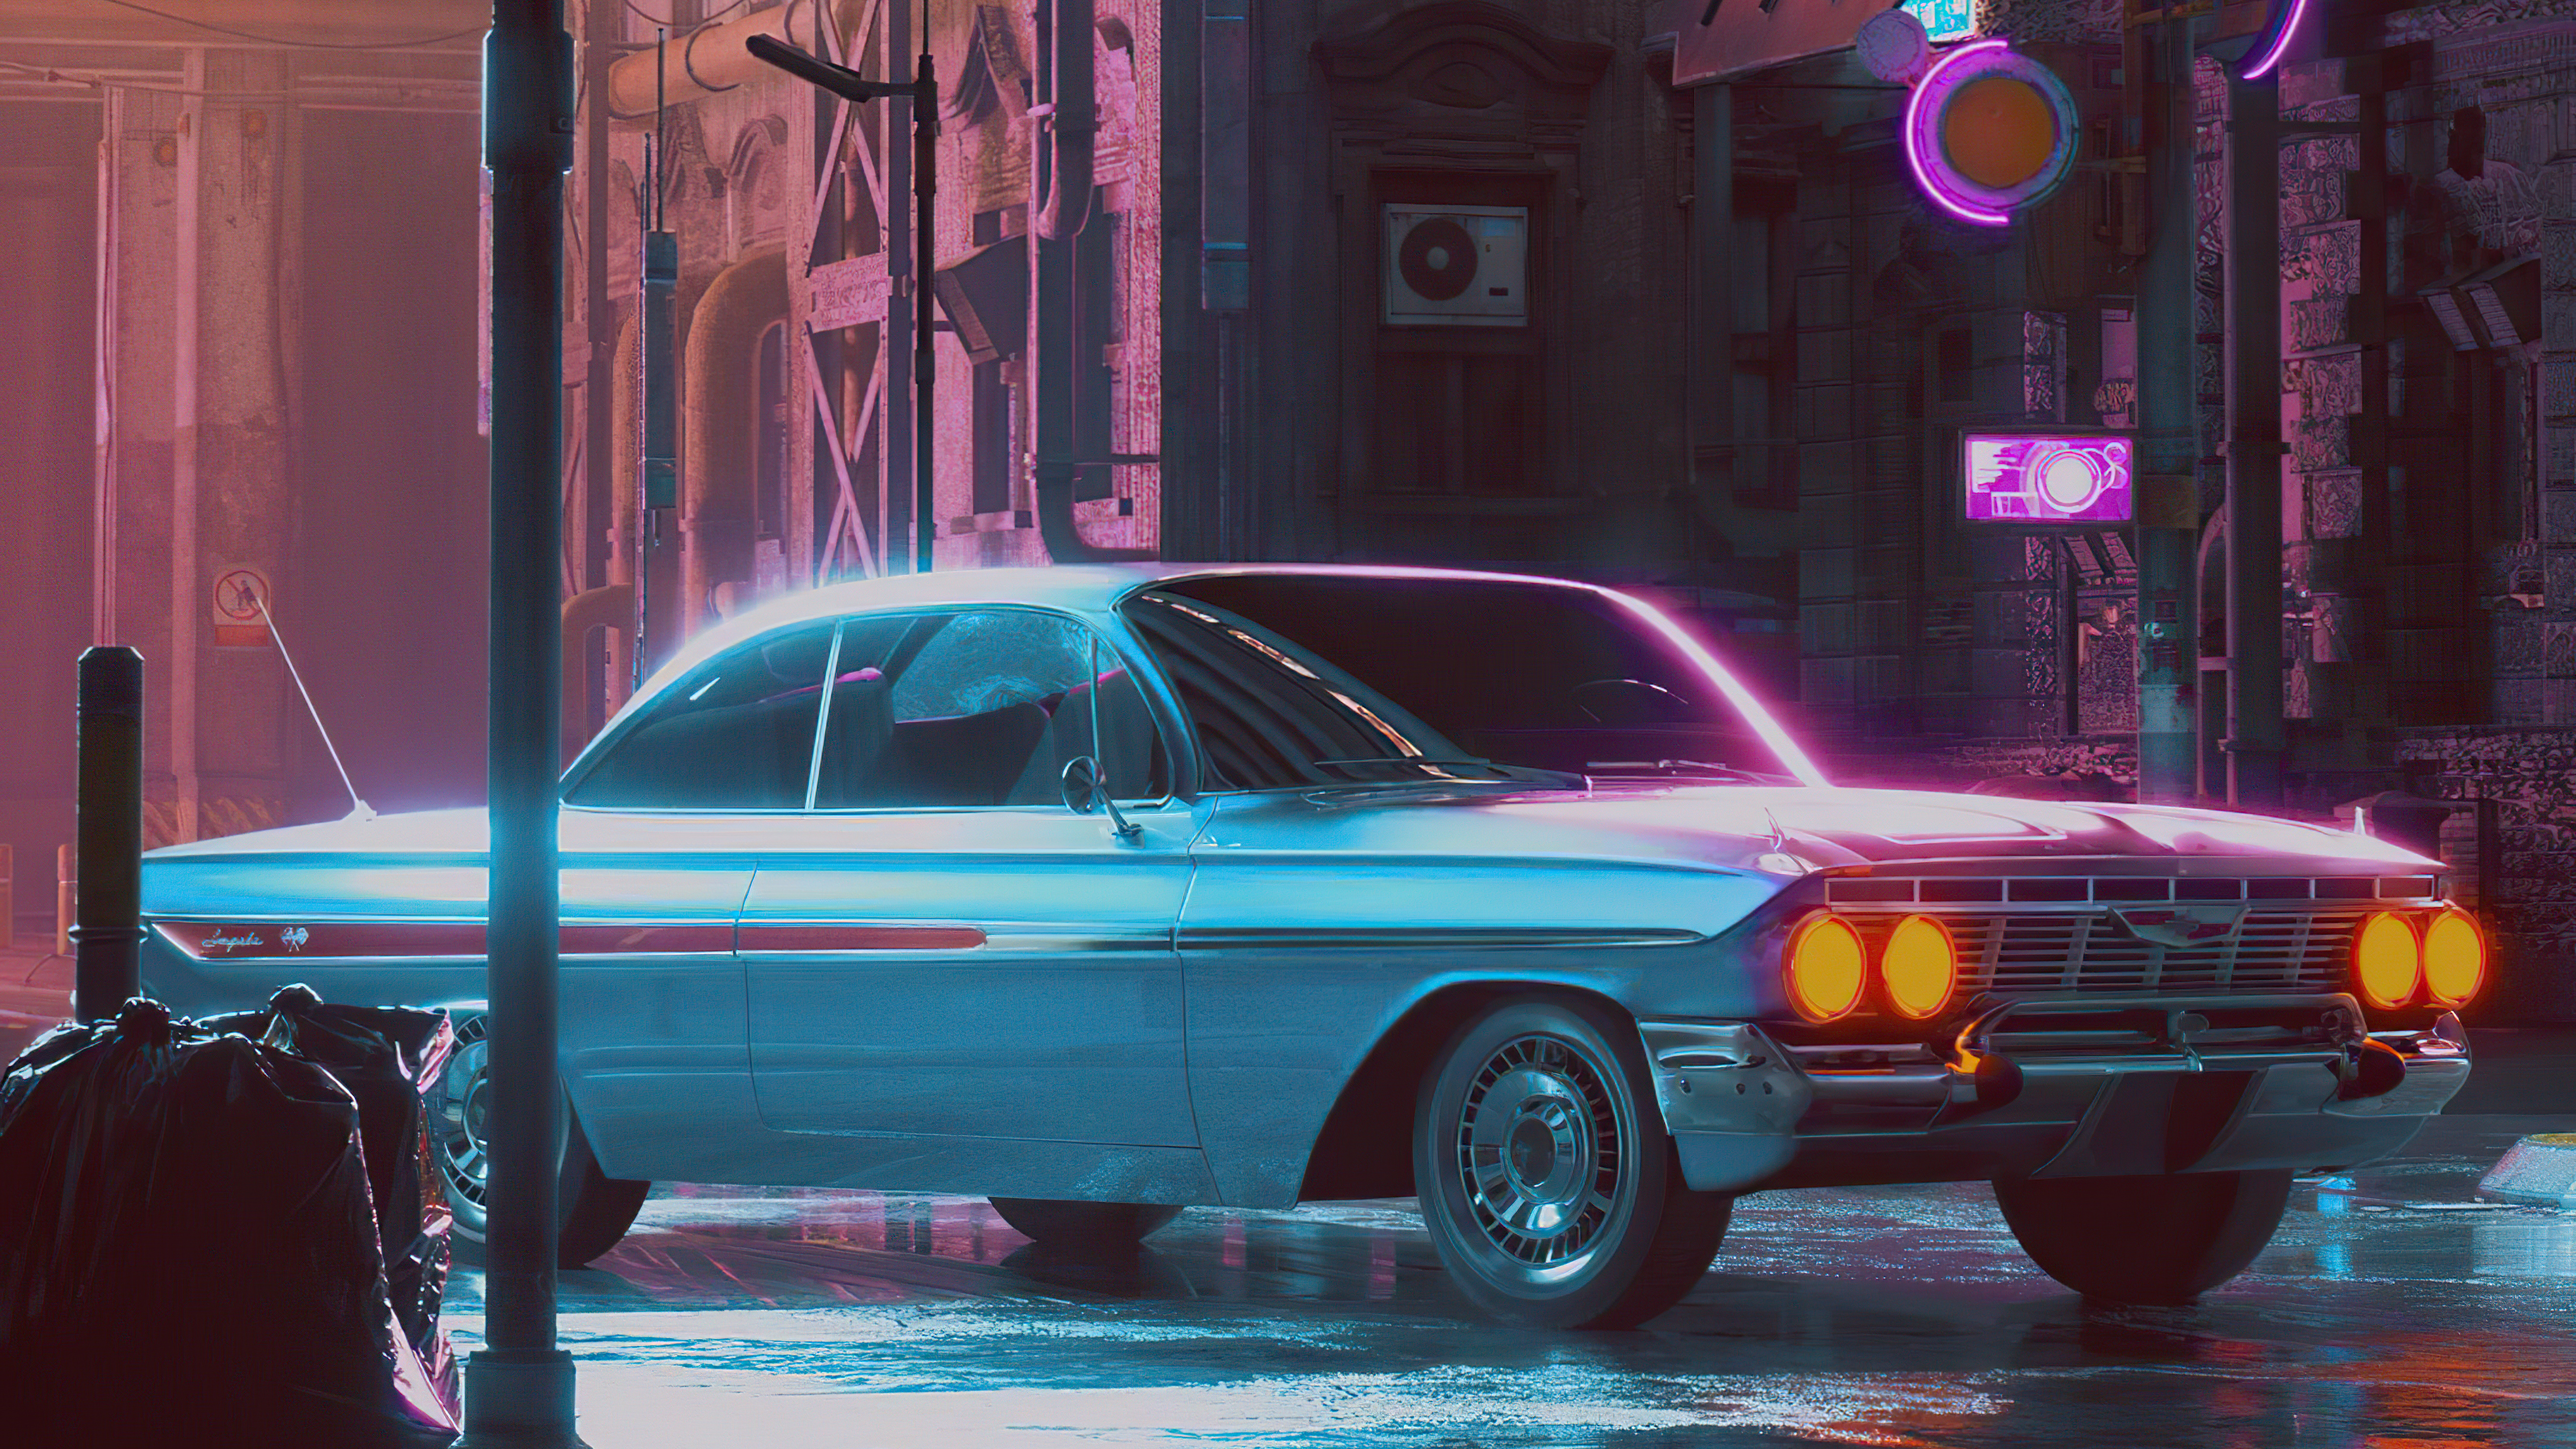 Lonely Night 80s Retro Car 5k, HD Artist, 4k Wallpaper, Image, Background, Photo and Picture